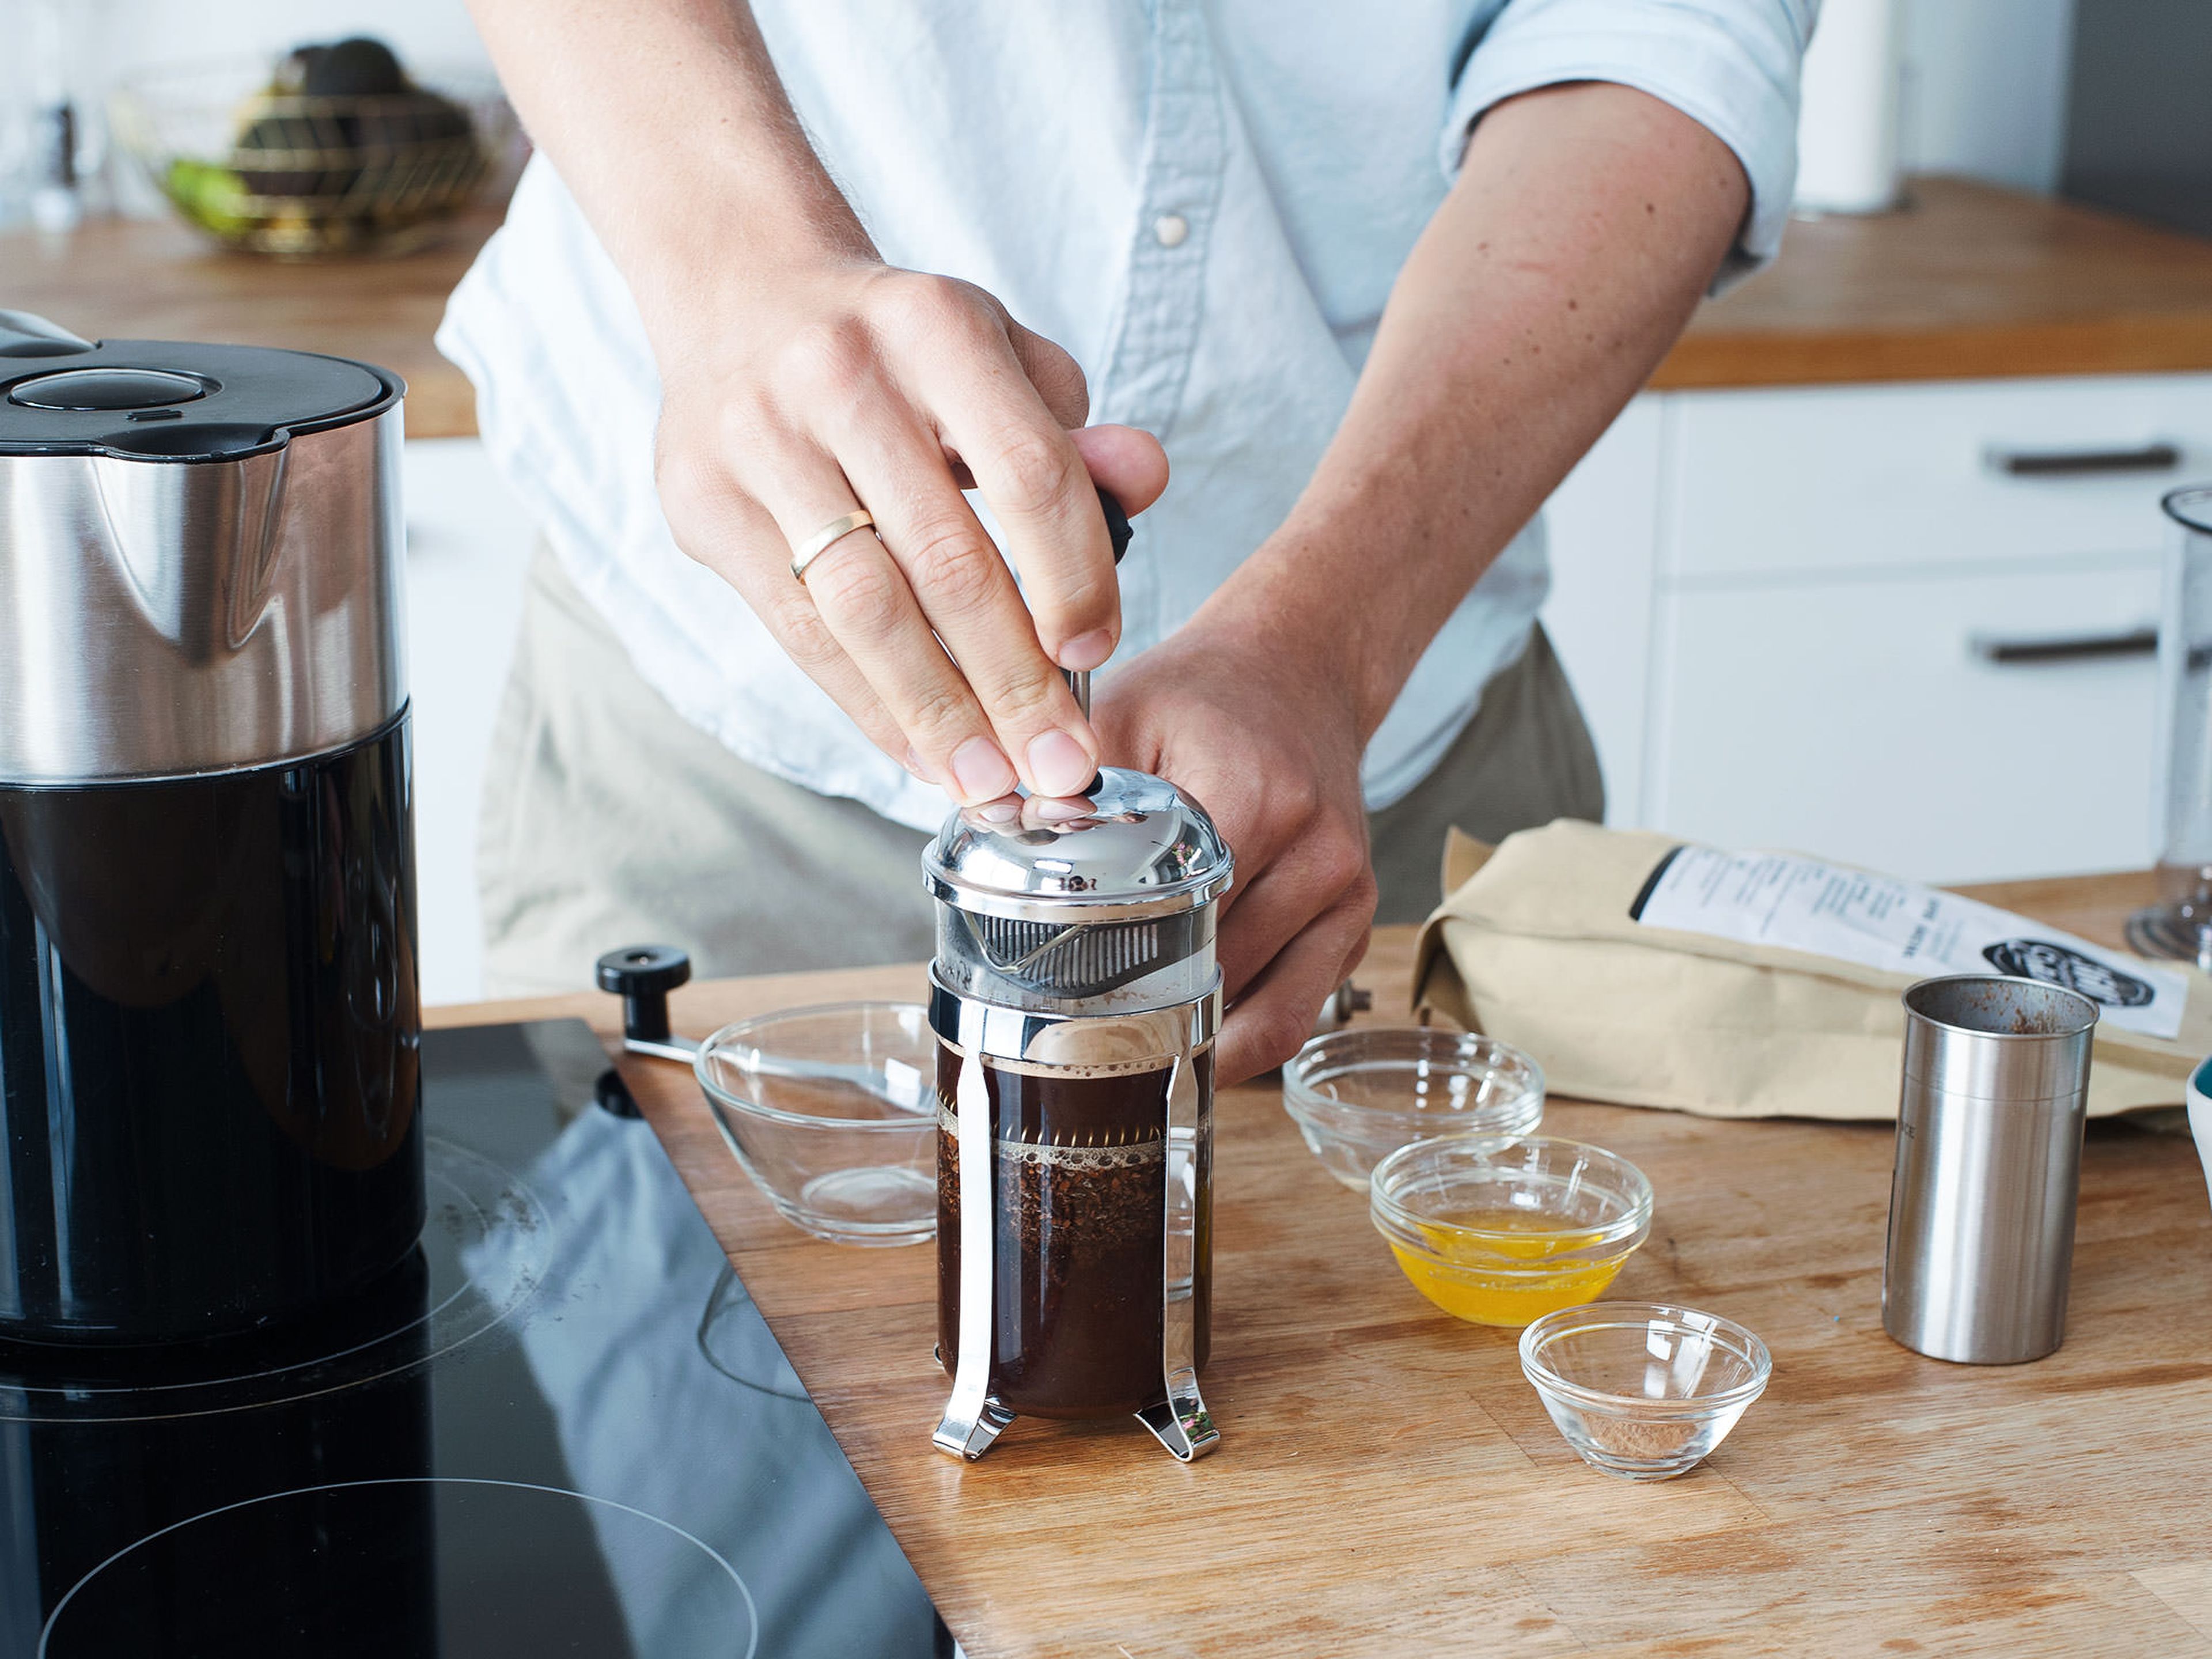 Prepare fresh coffee according to your preferred method using filtered water and a stovetop espresso pot or a French press.